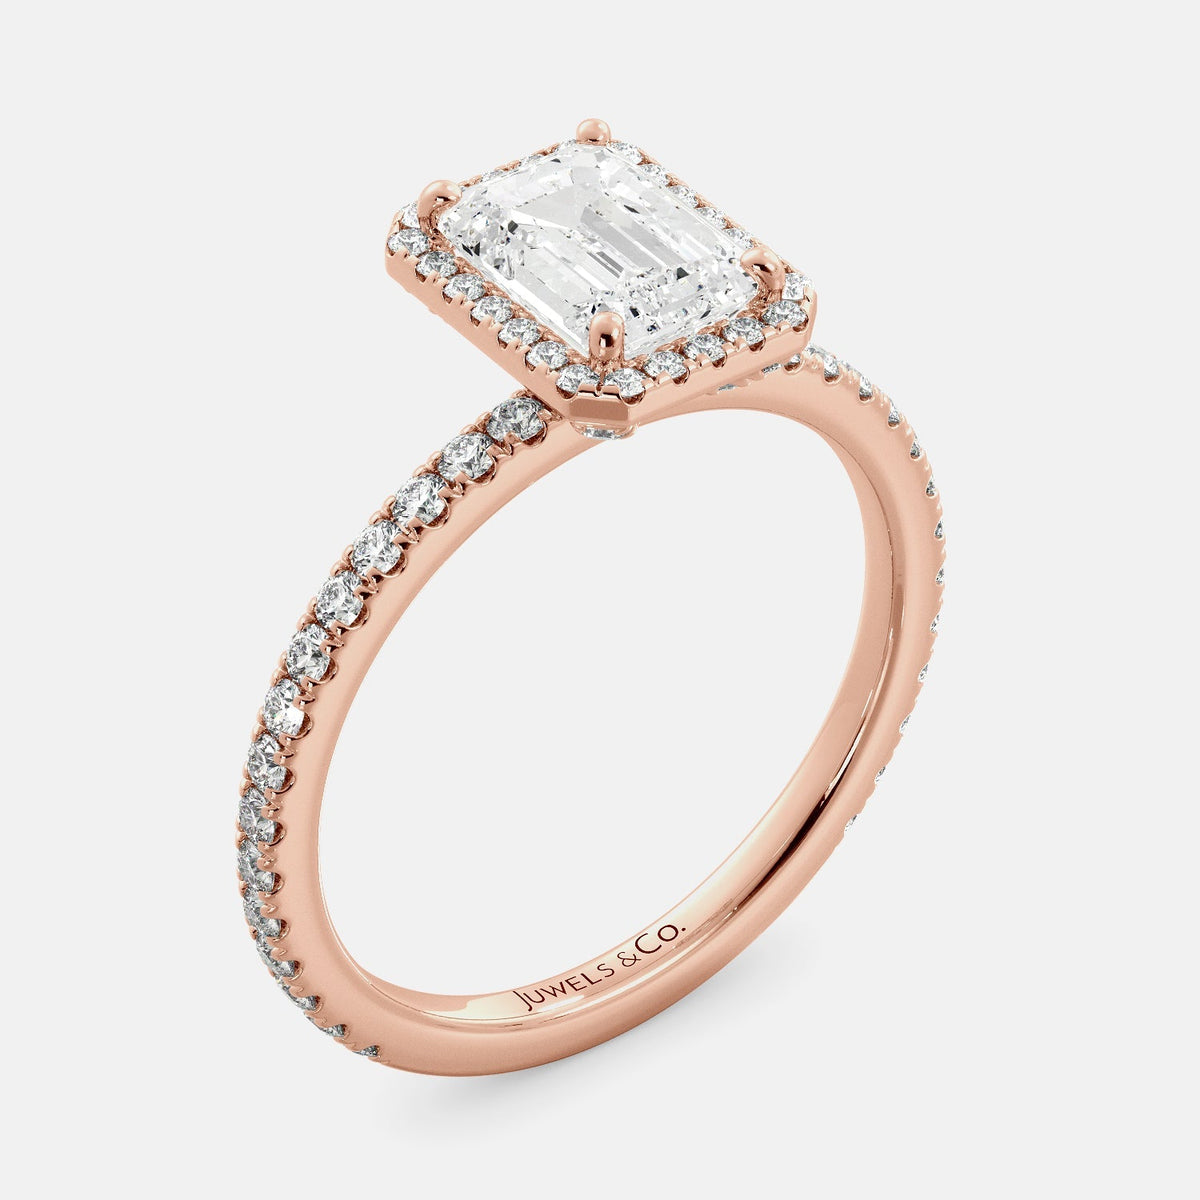 This image shows a stunning emerald halo lab-grown diamond ring with pavé on a rose gold band. The ring features a 1.5-carat emerald-cut lab-grown diamond in the center, surrounded by a halo of smaller lab-grown diamonds. The ring is made of 14k rose gold and is available in a variety of sizes.